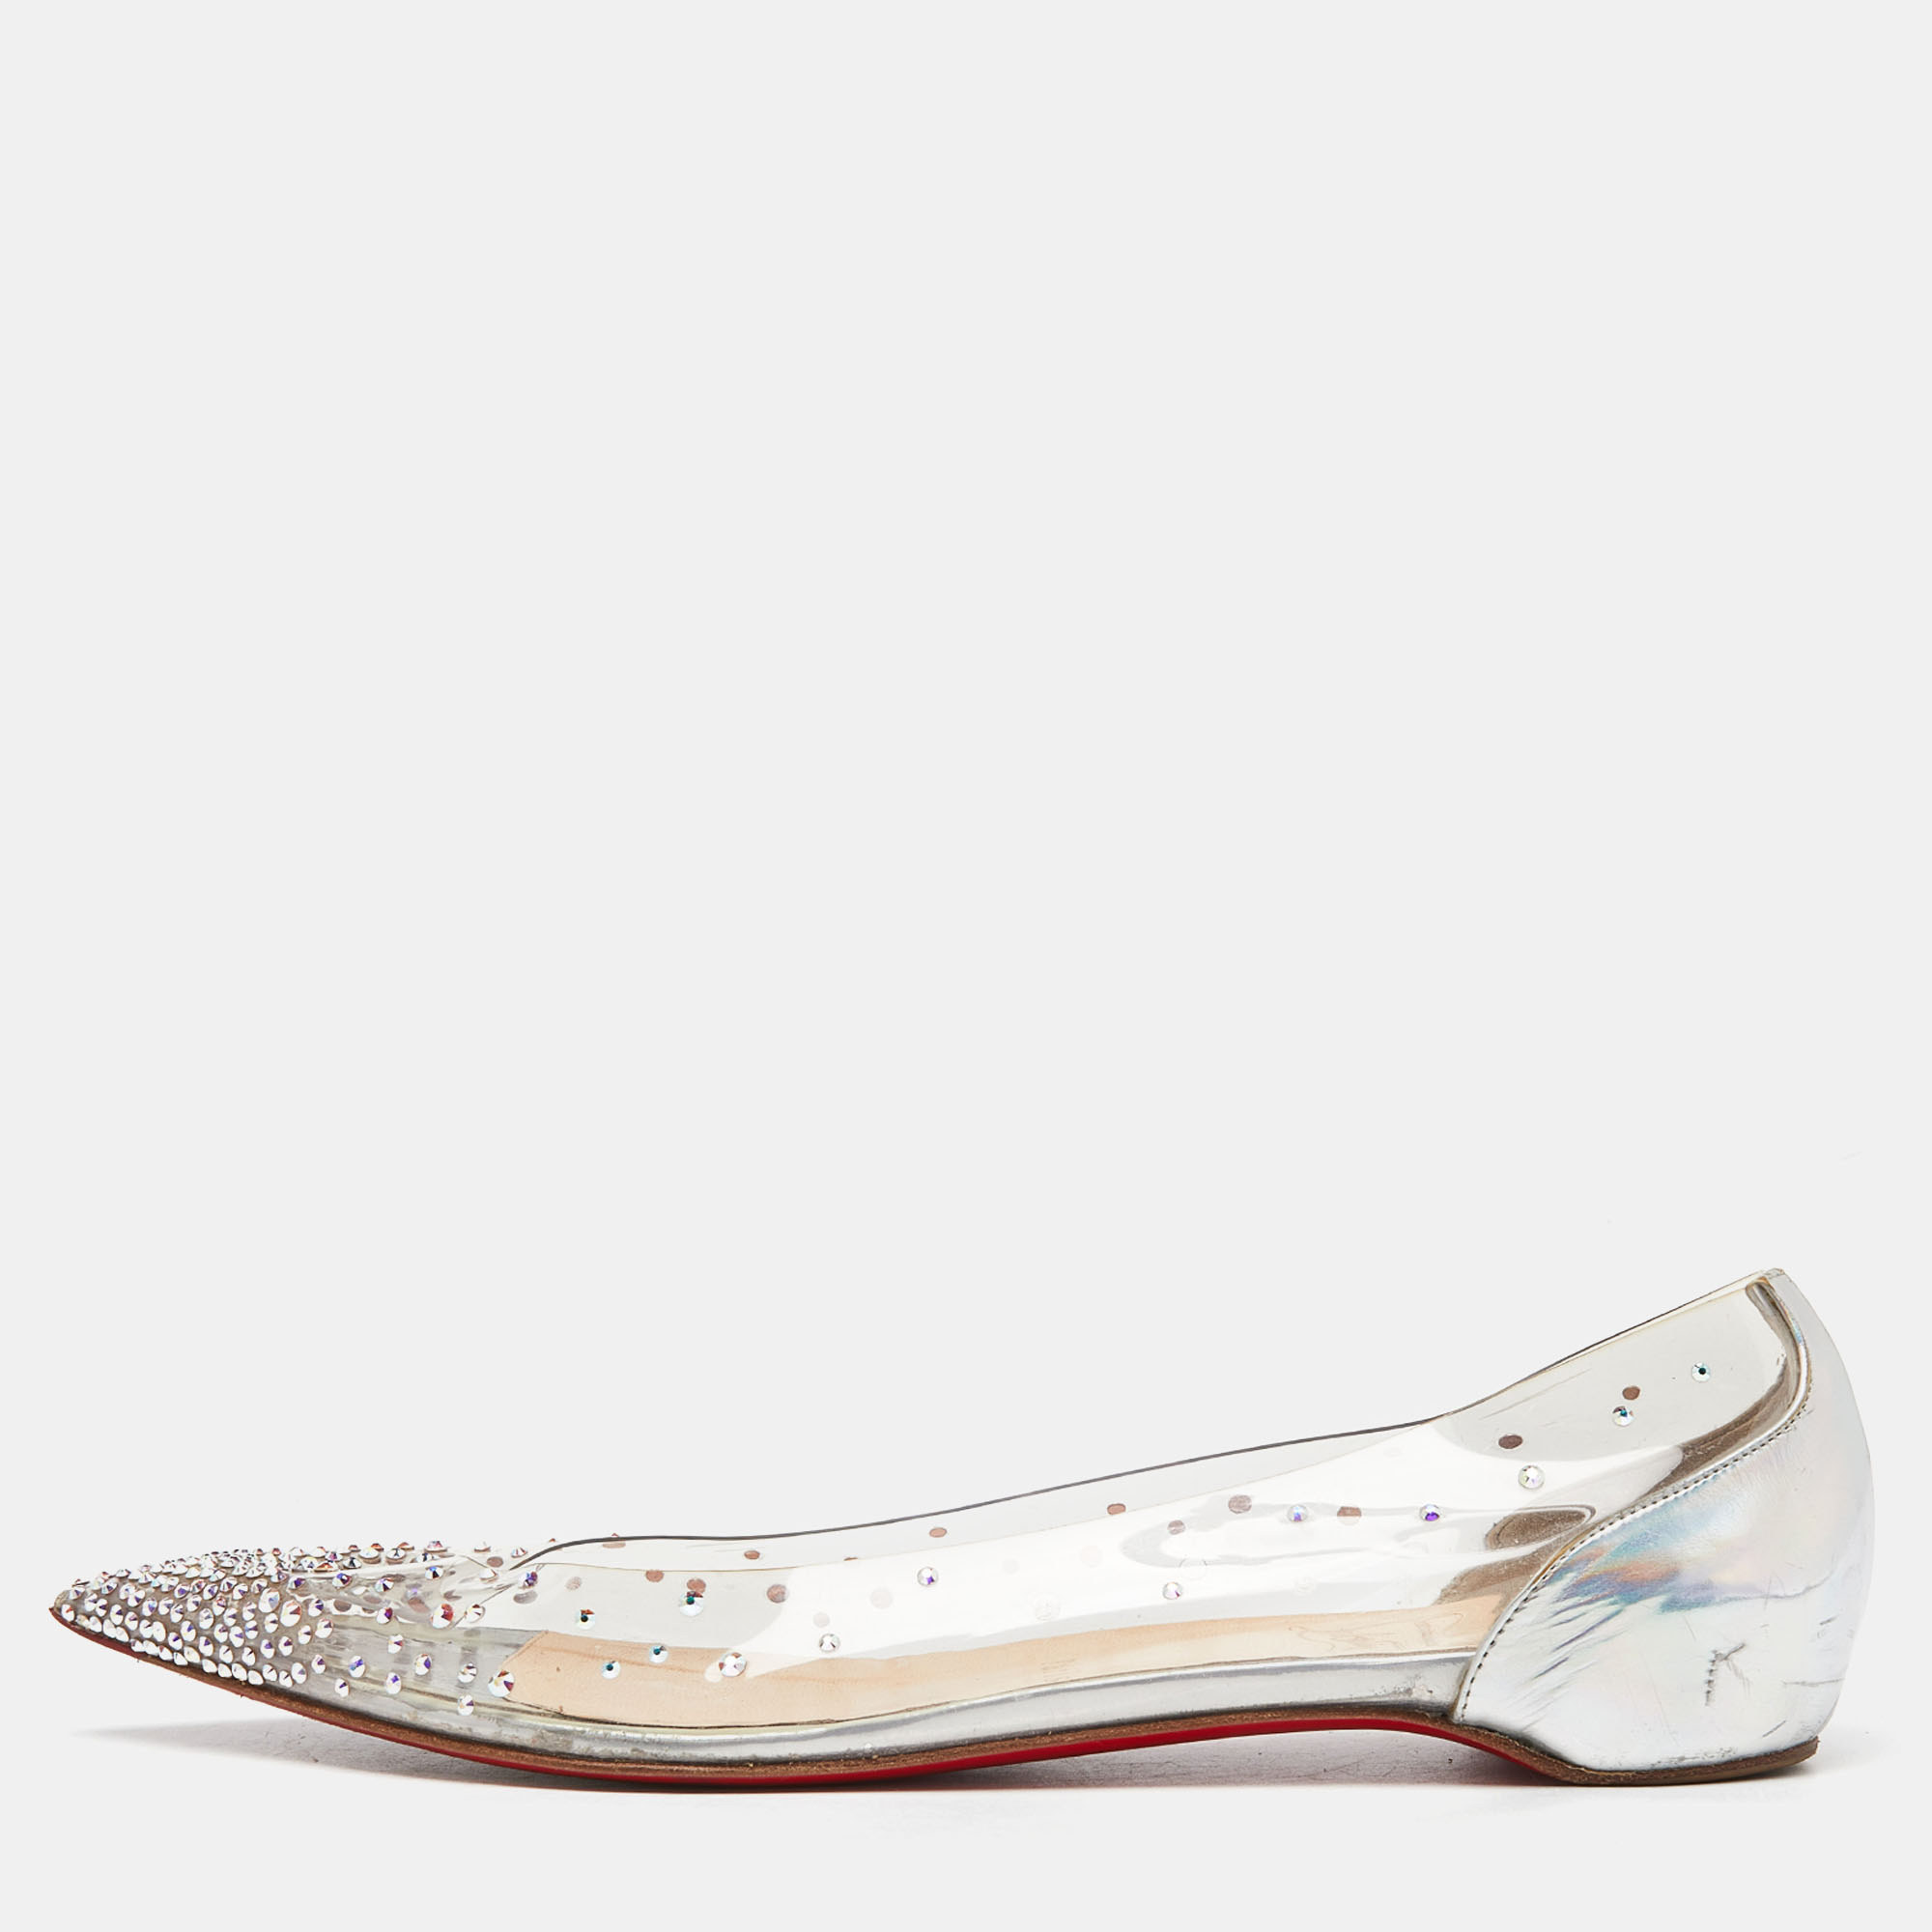 Pre-owned Christian Louboutin Transparent Pvc And Patent Leather Follies Strass Ballet Flats Size 40